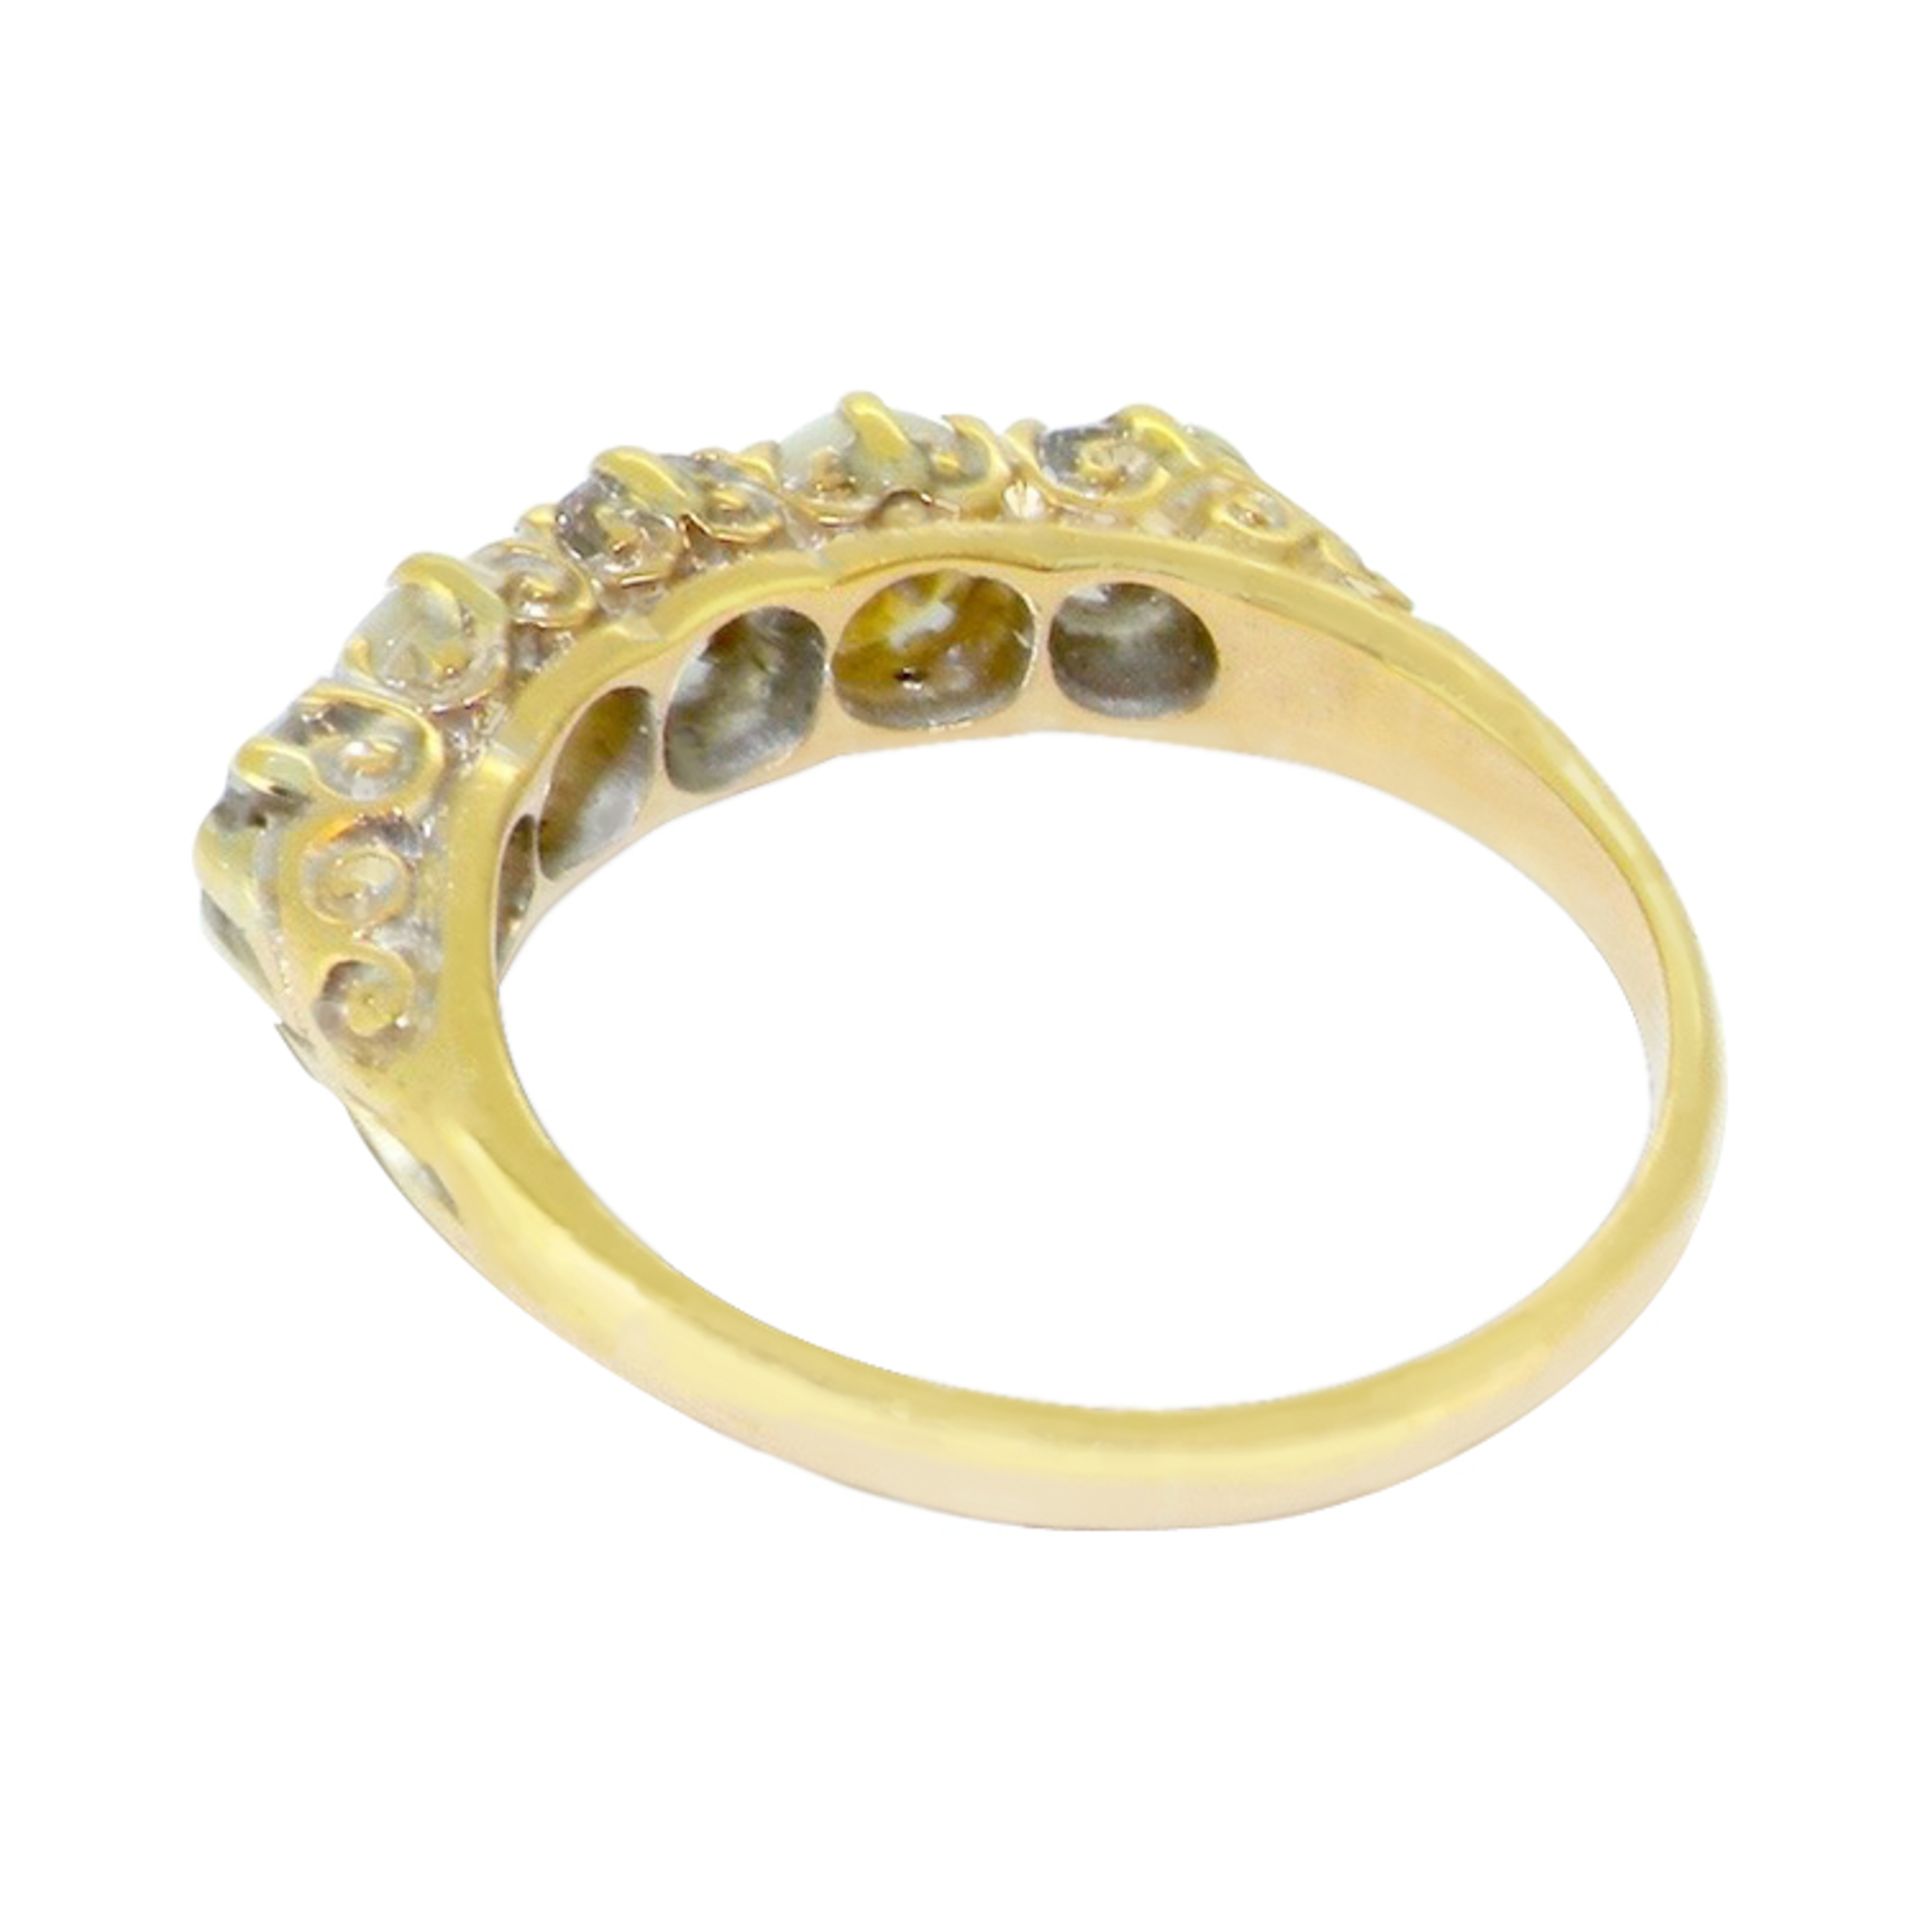 A Victorian Pearl & Diamond Ring - Image 2 of 2